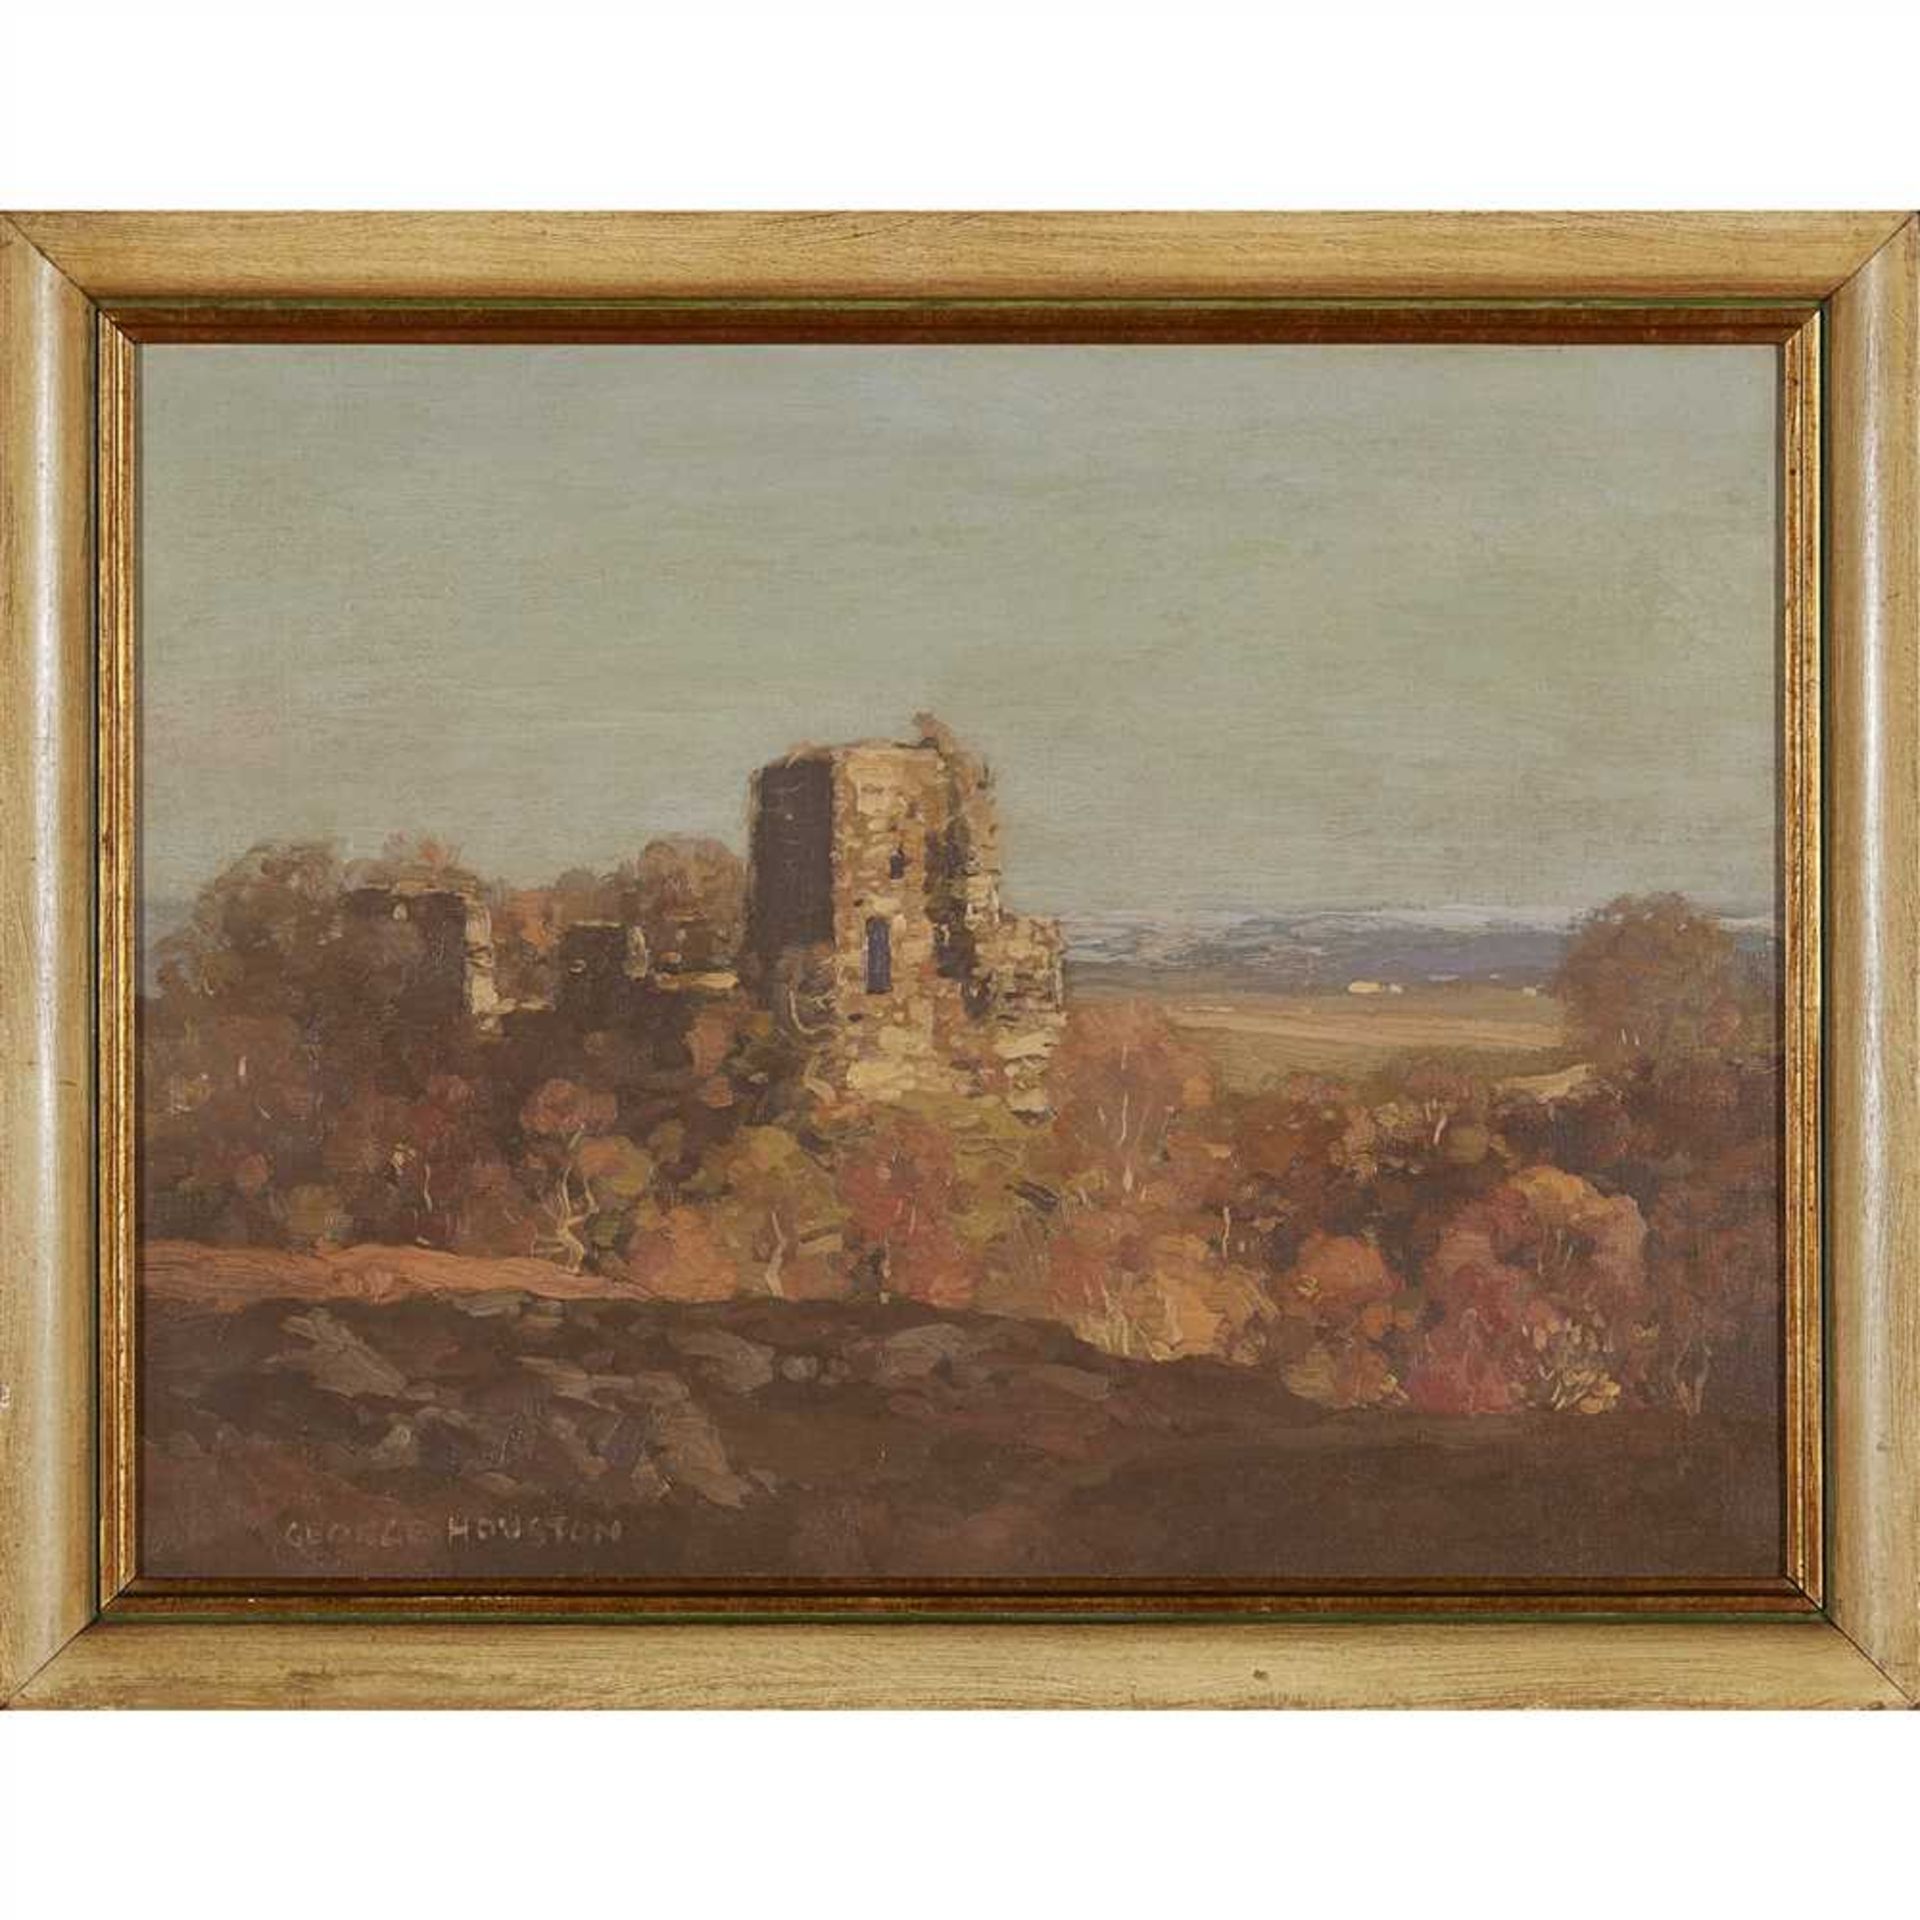 GEORGE HOUSTON R.S.A, R.S.W., R.G.I (SCOTTISH 1869-1947) AUTUMNAL LANDSCAPE WITH RUINS Signed, oil - Image 2 of 2